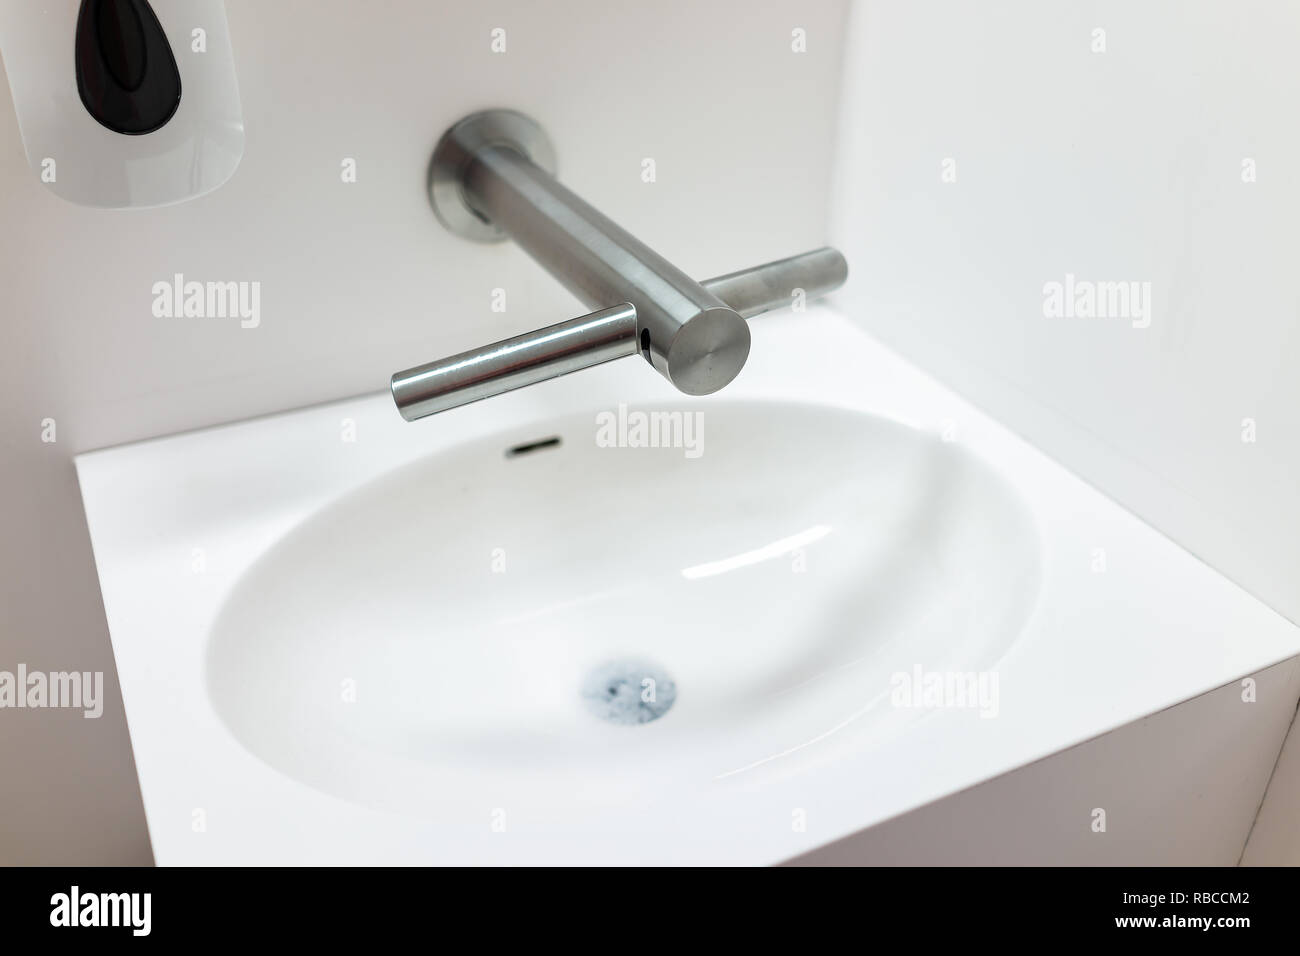 Modern sink in public toilet with soap dispenser, clean white minimalist background interior with metal faucet closeup Stock Photo